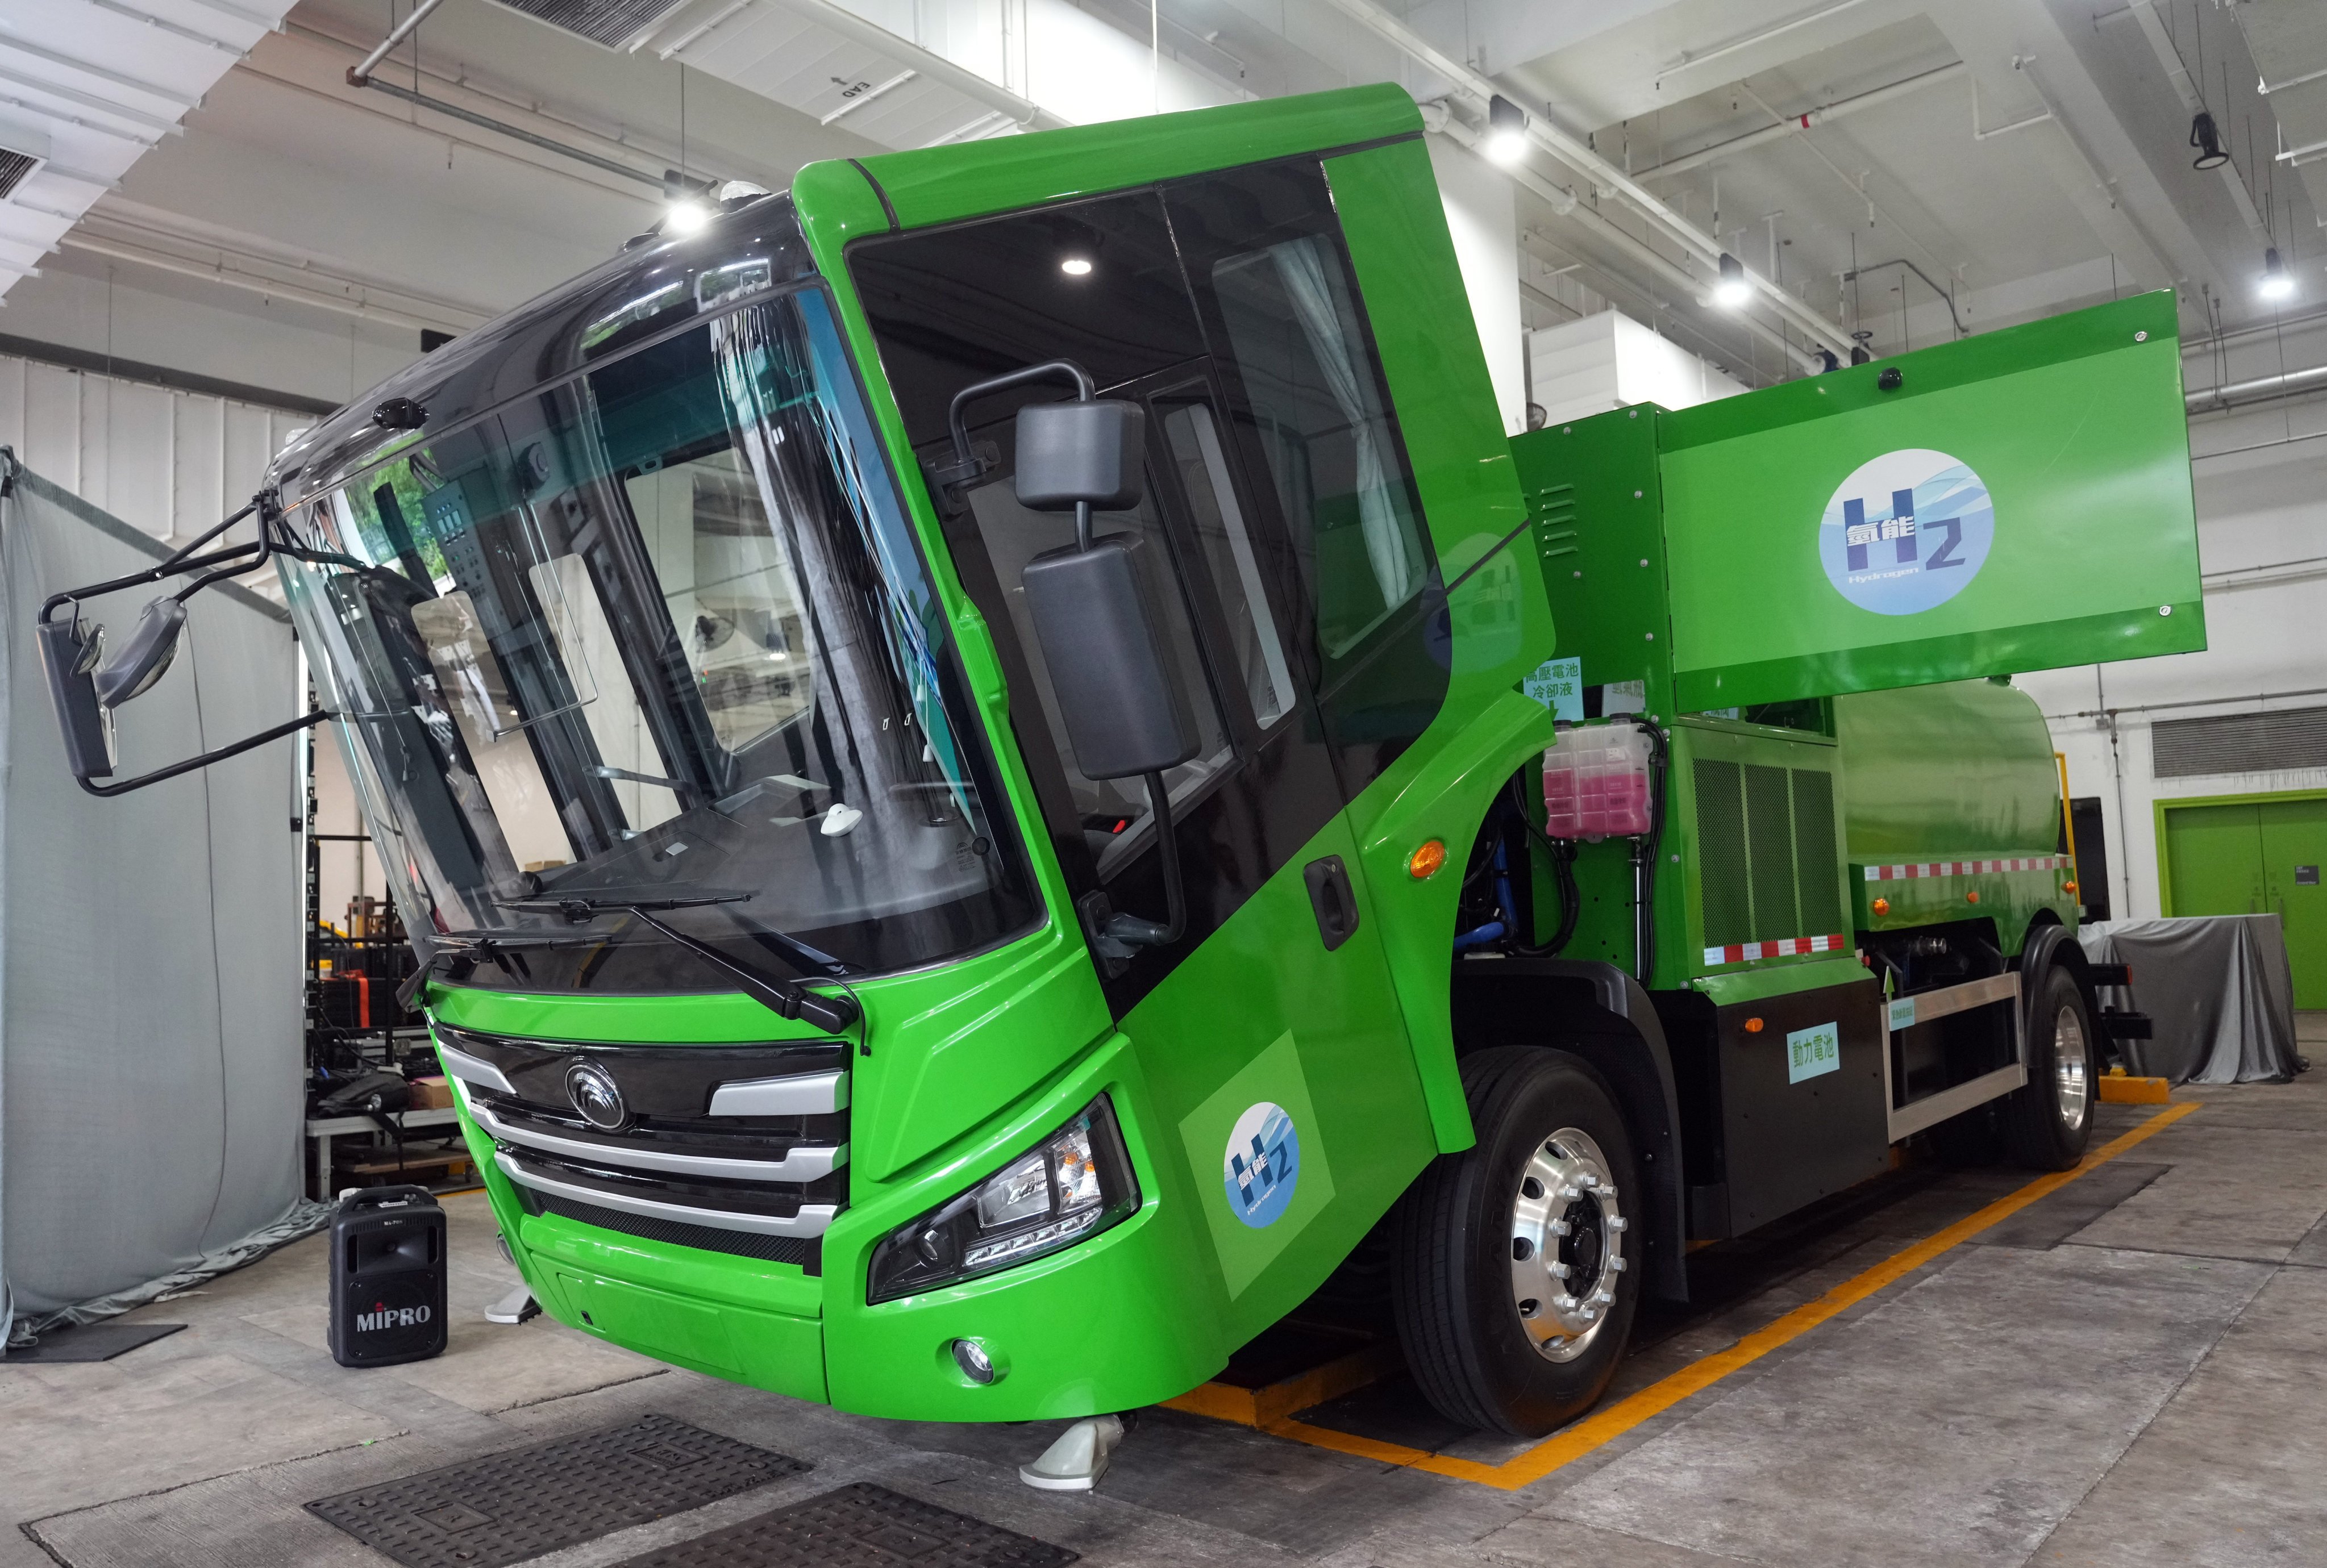 A hydrogen-powered street washing vehicle is displayed by the Food and Environmental Hygiene Department at its depot in Cheung Sha Wan. Photo: Sam Tsang